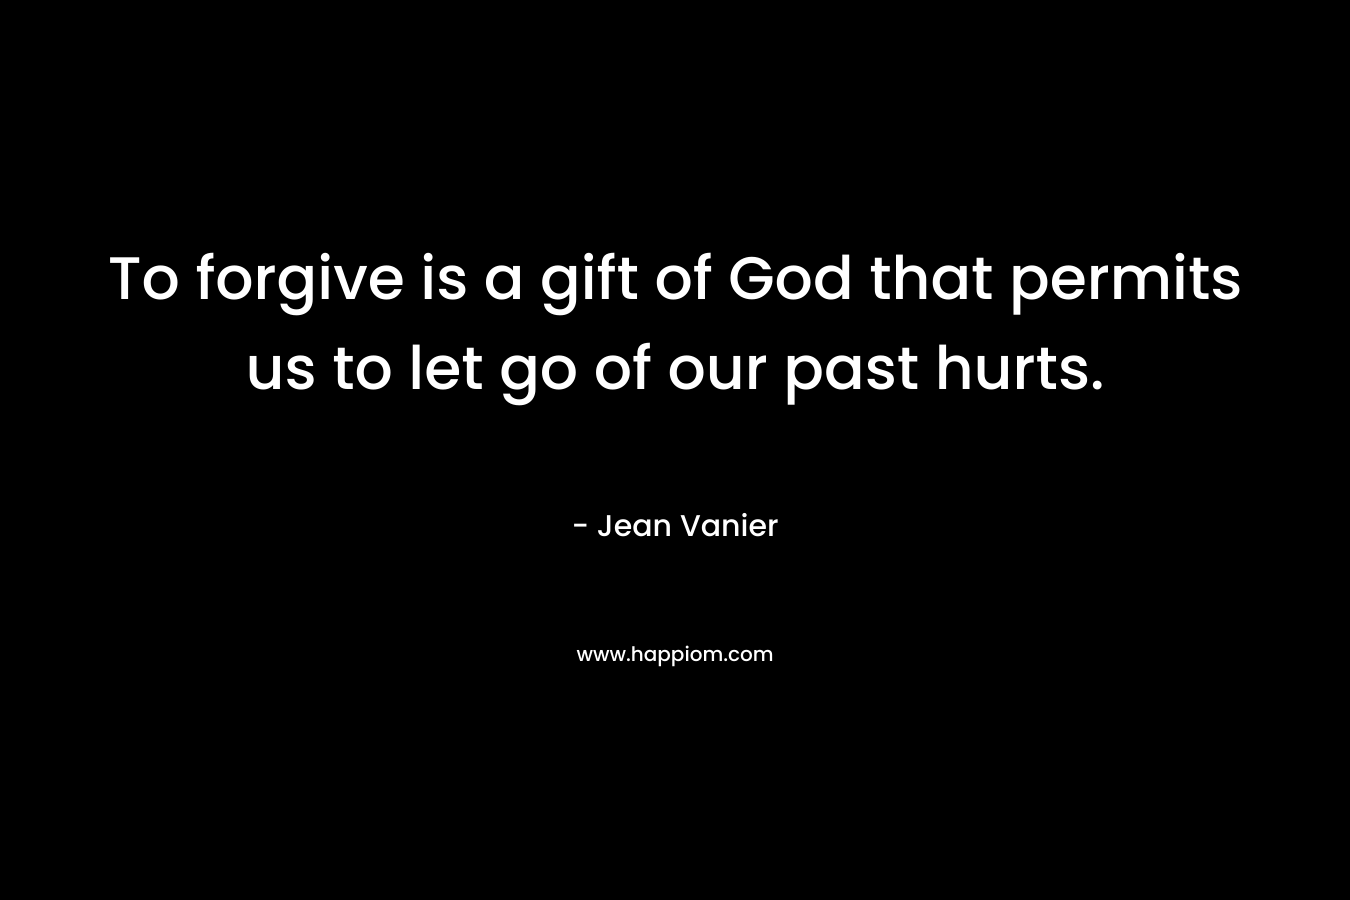 To forgive is a gift of God that permits us to let go of our past hurts.